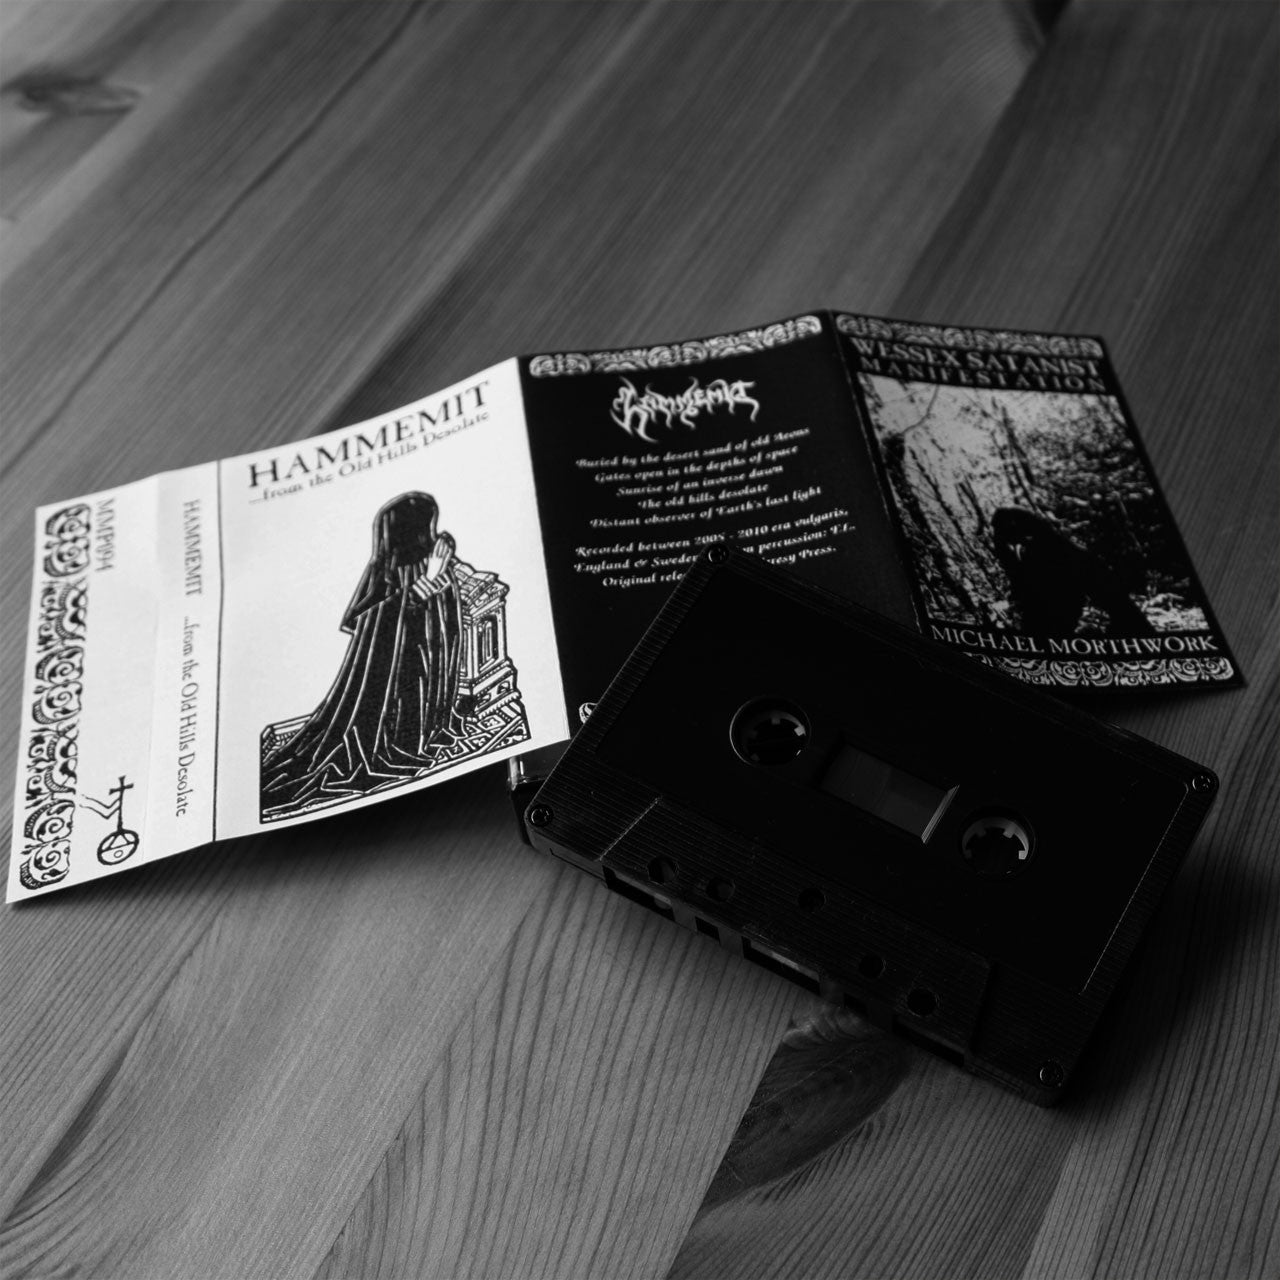 Hammemit - ...from the Old Hills Desolate (Cassette)